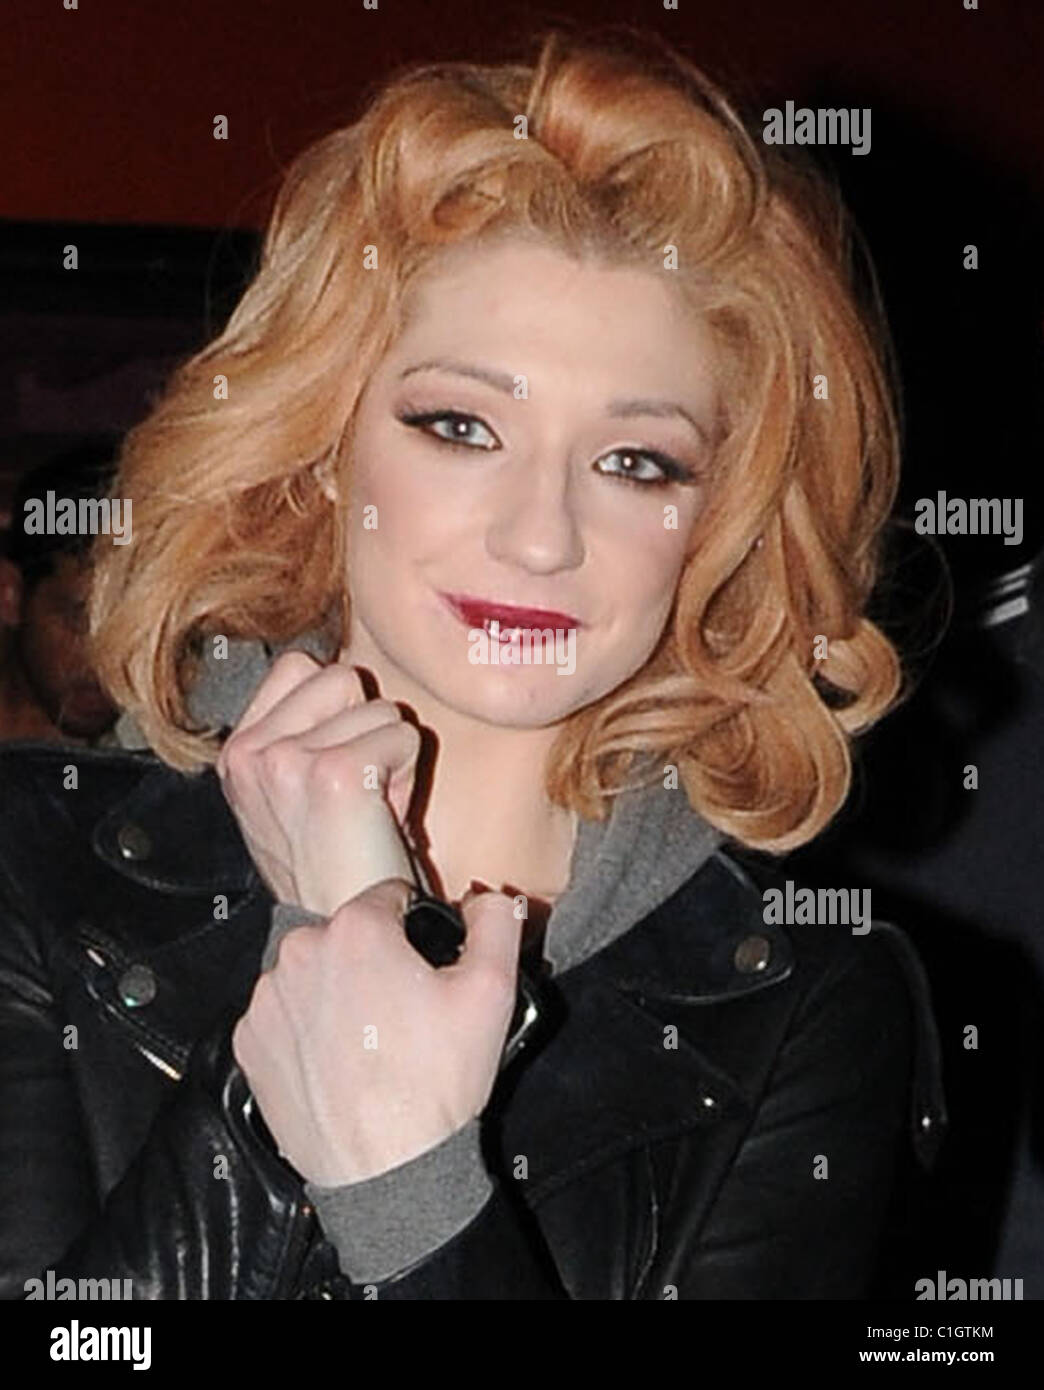 Nicola Roberts of Girls Aloud arriving at her hotel after performing in concert at the NIA Birmingham, England - 20.05.09 Stock Photo